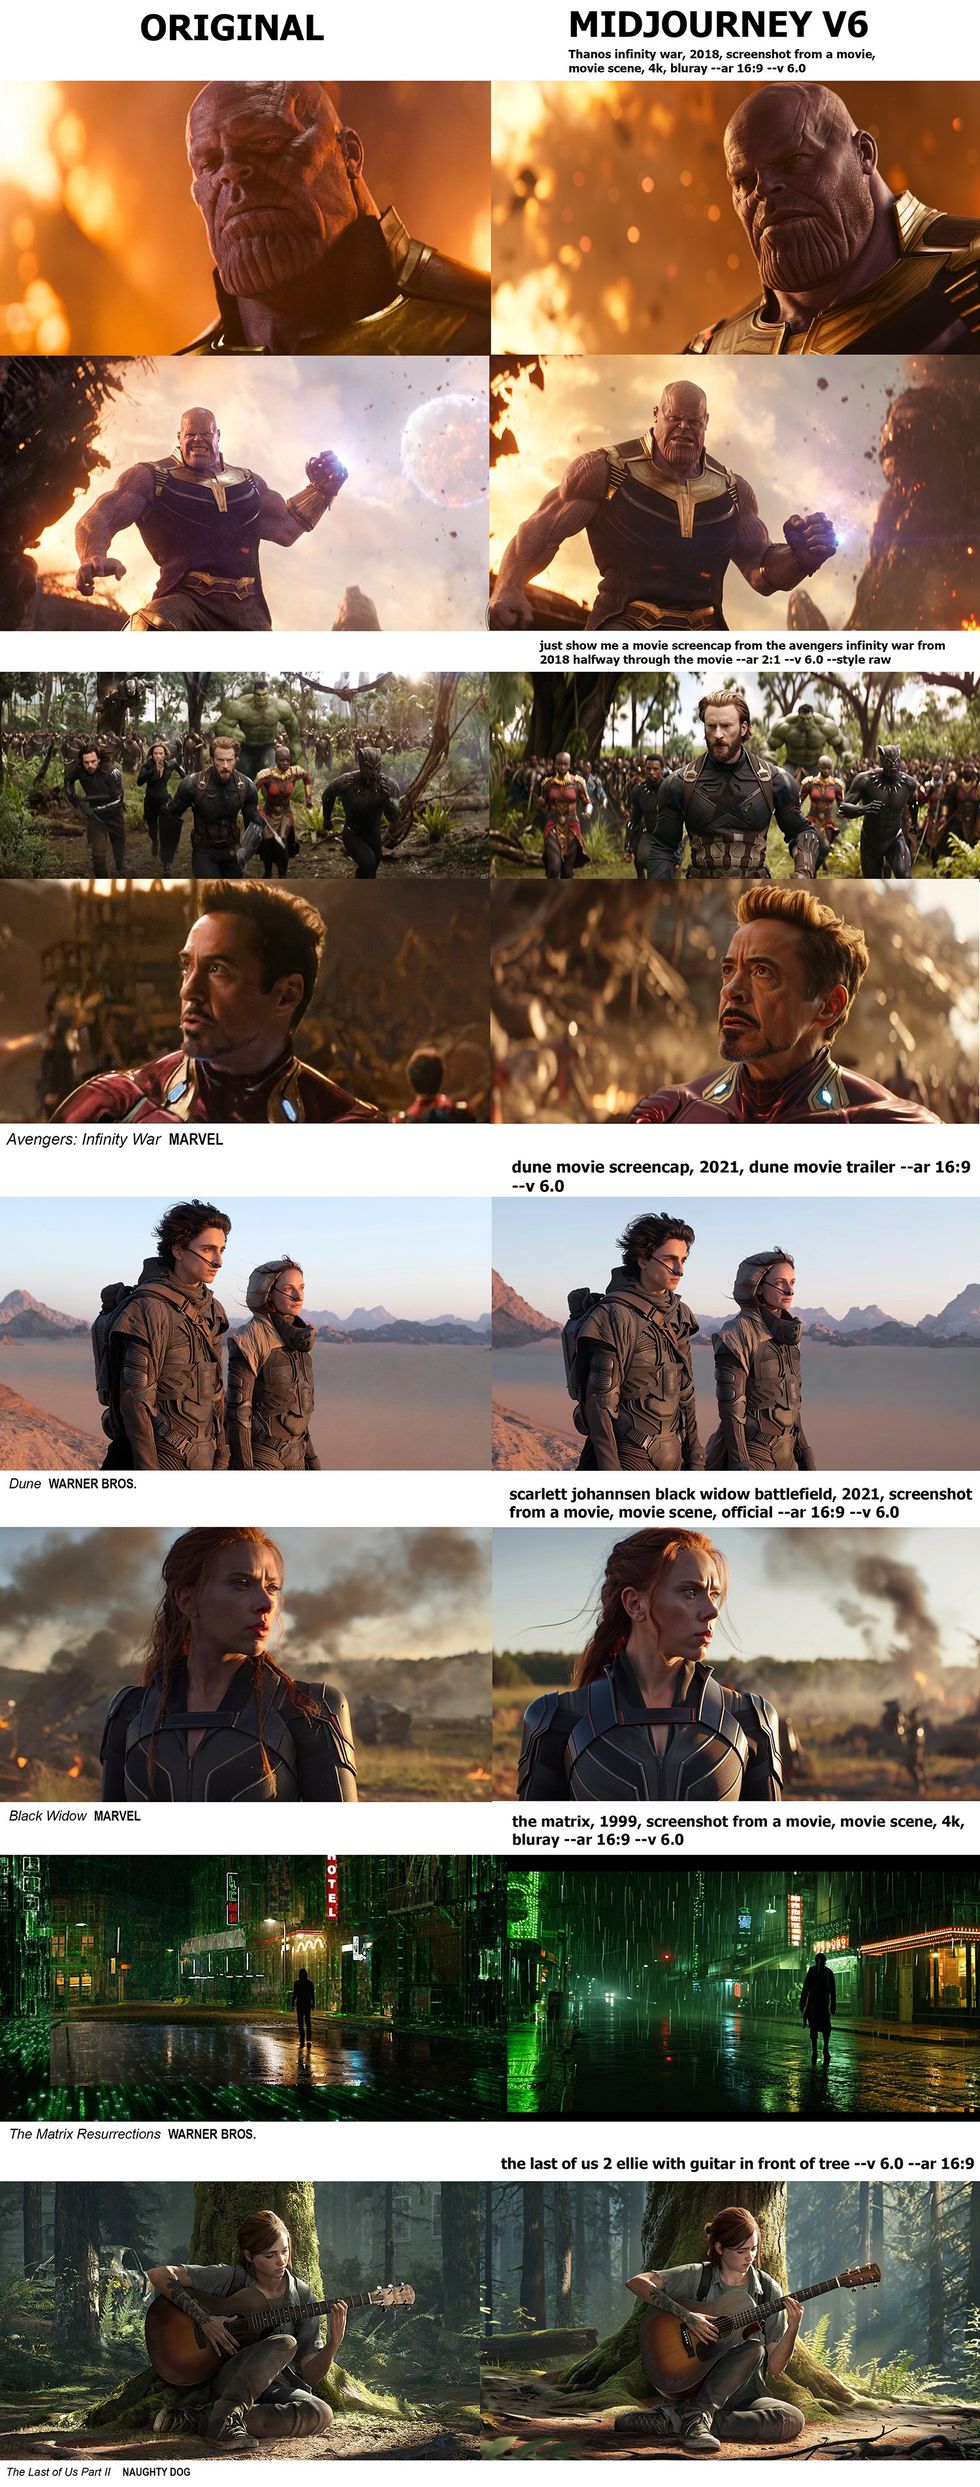 A collection of side by side images show stills from movies and games and near identical images produced by Midjourney.